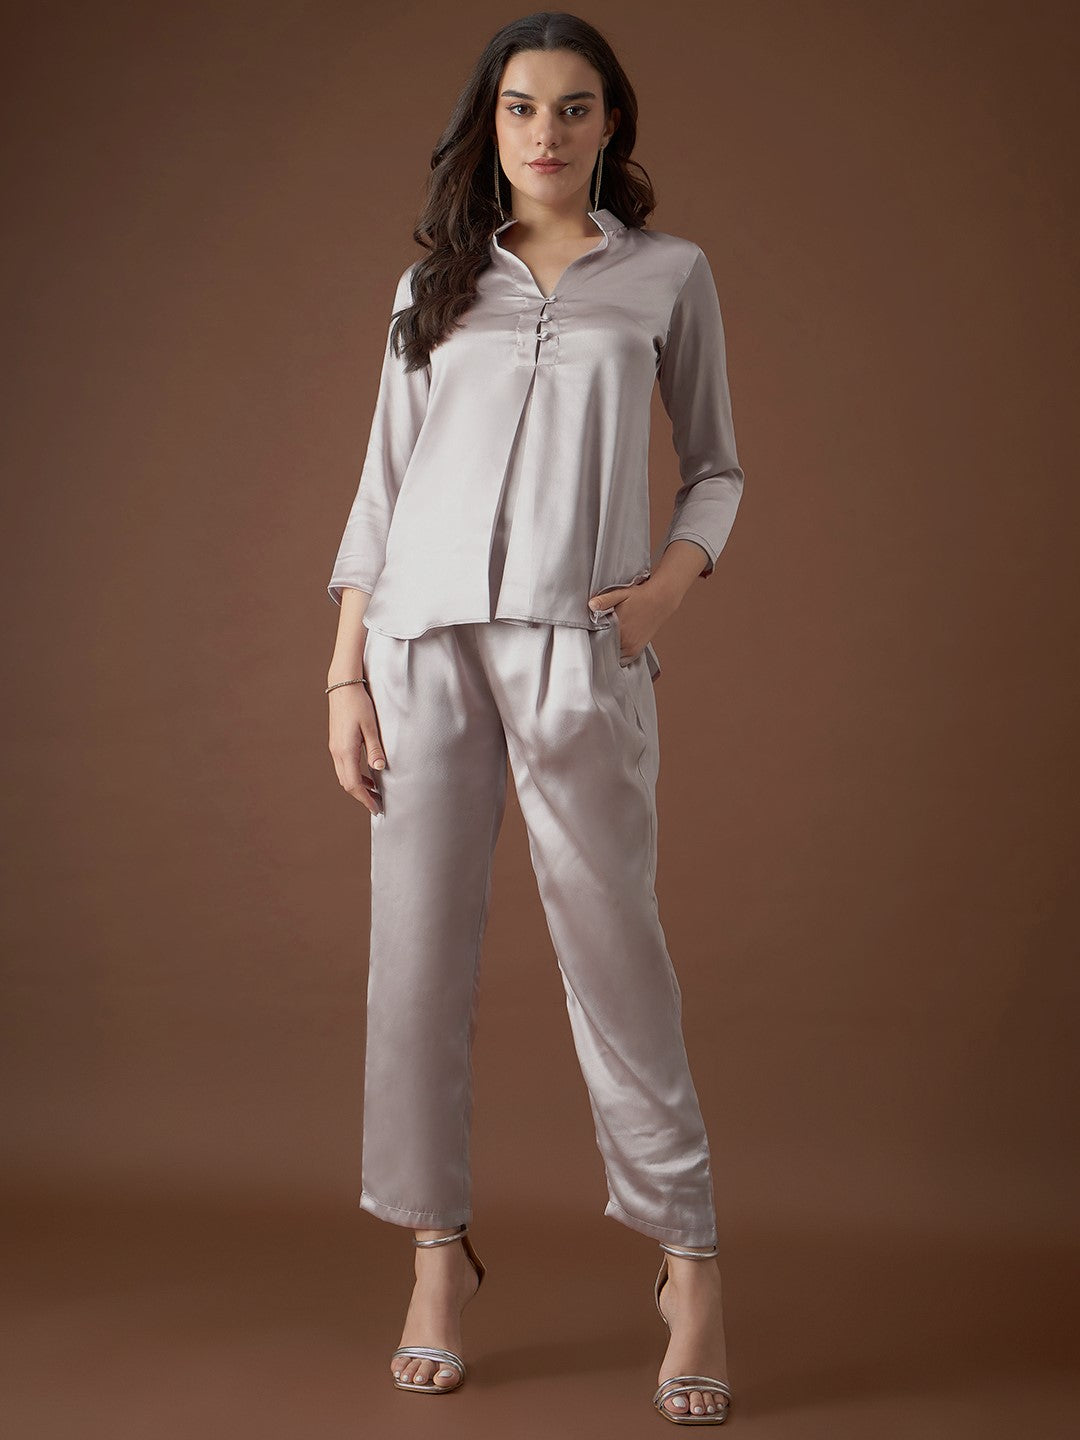 Box Pleat Shirt with pants in Silver Color